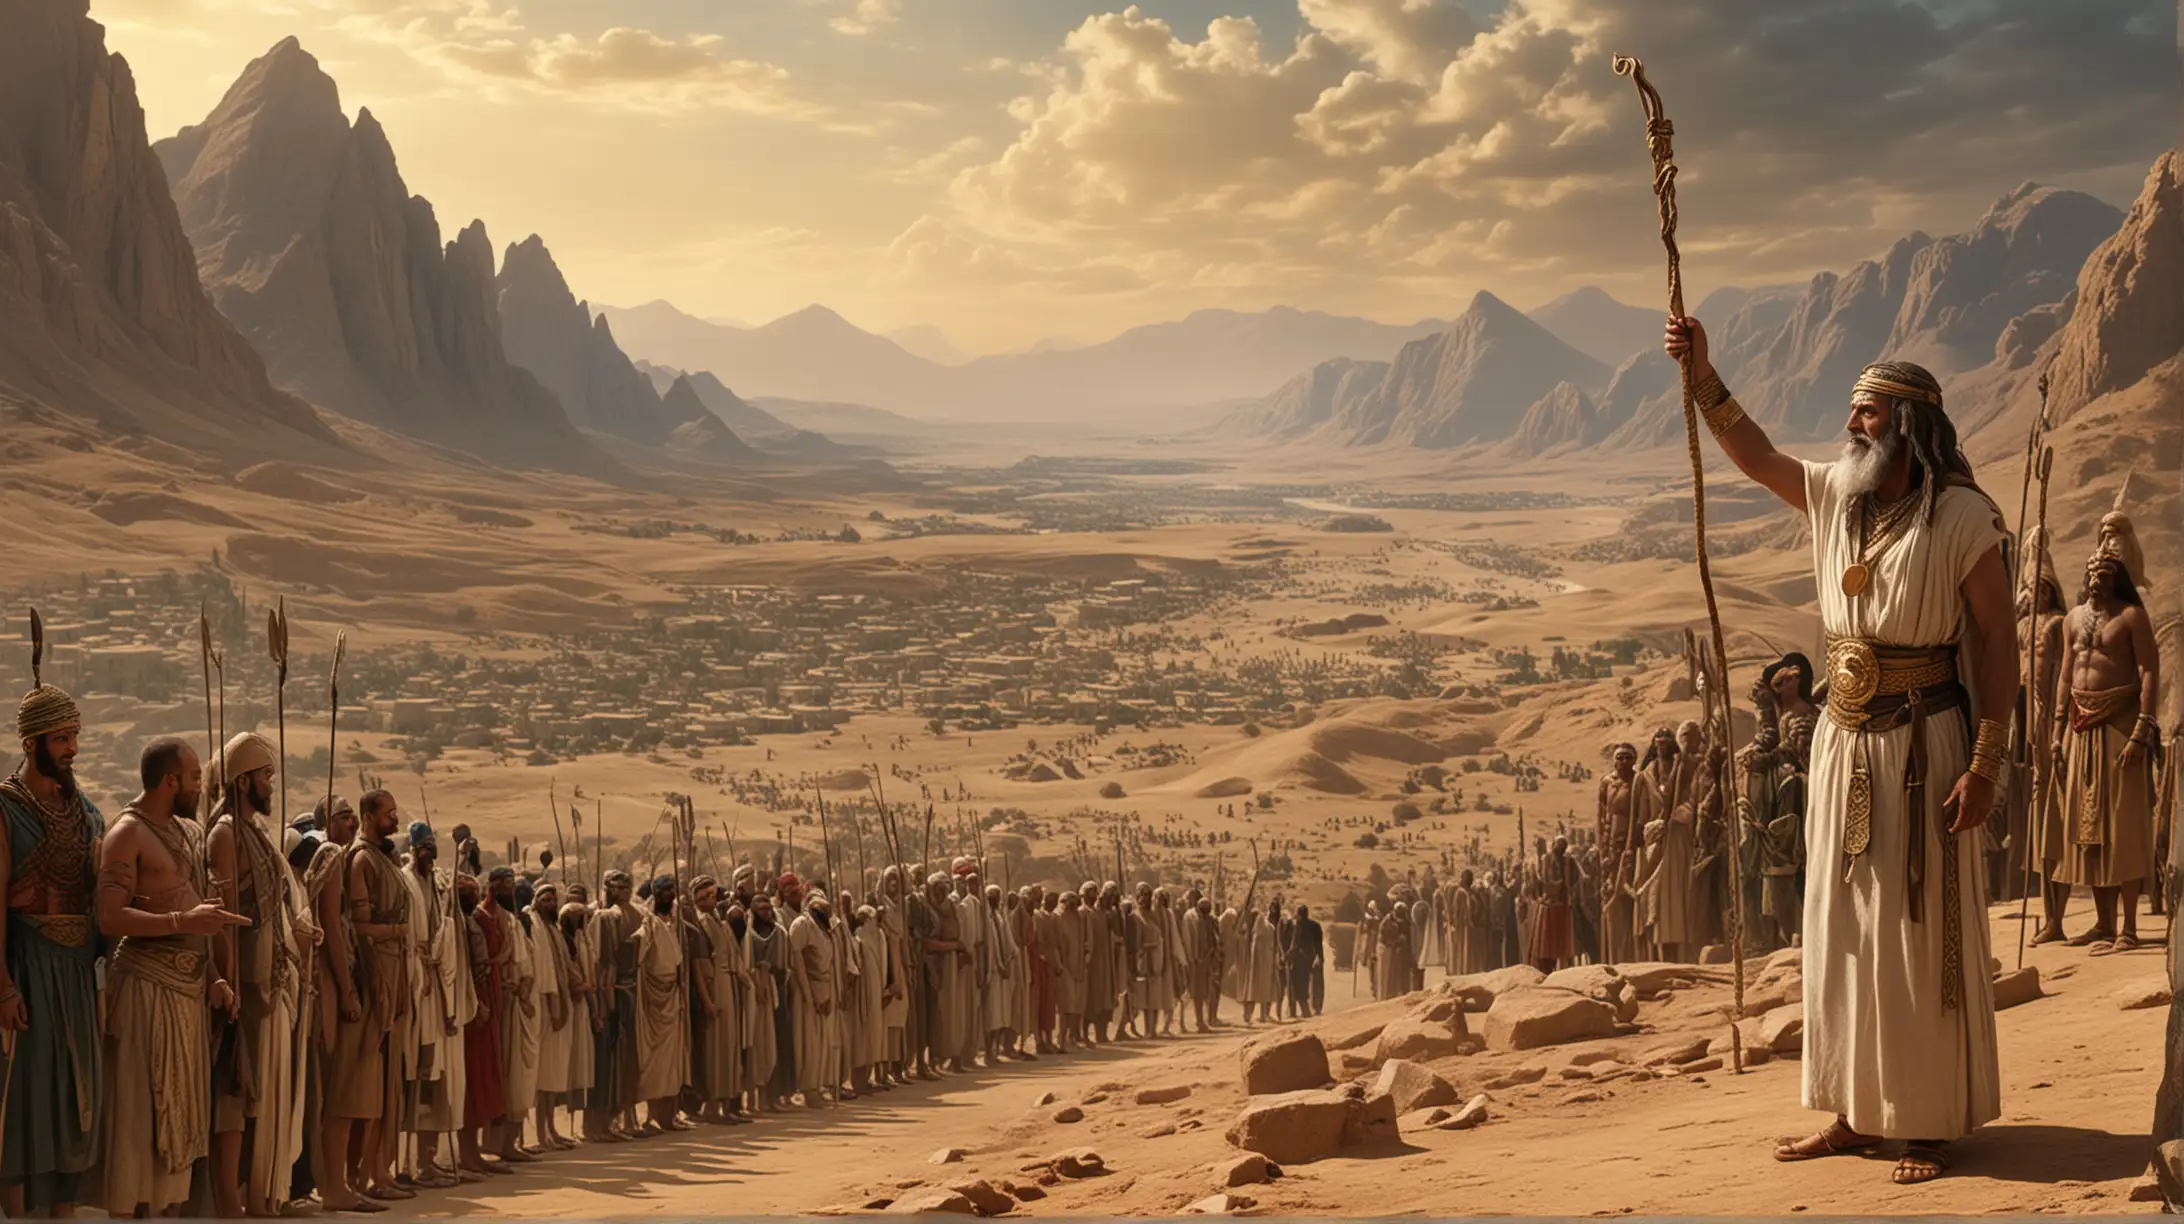 Biblical Encounter Moses Confronts Pharaoh with Transforming Rod